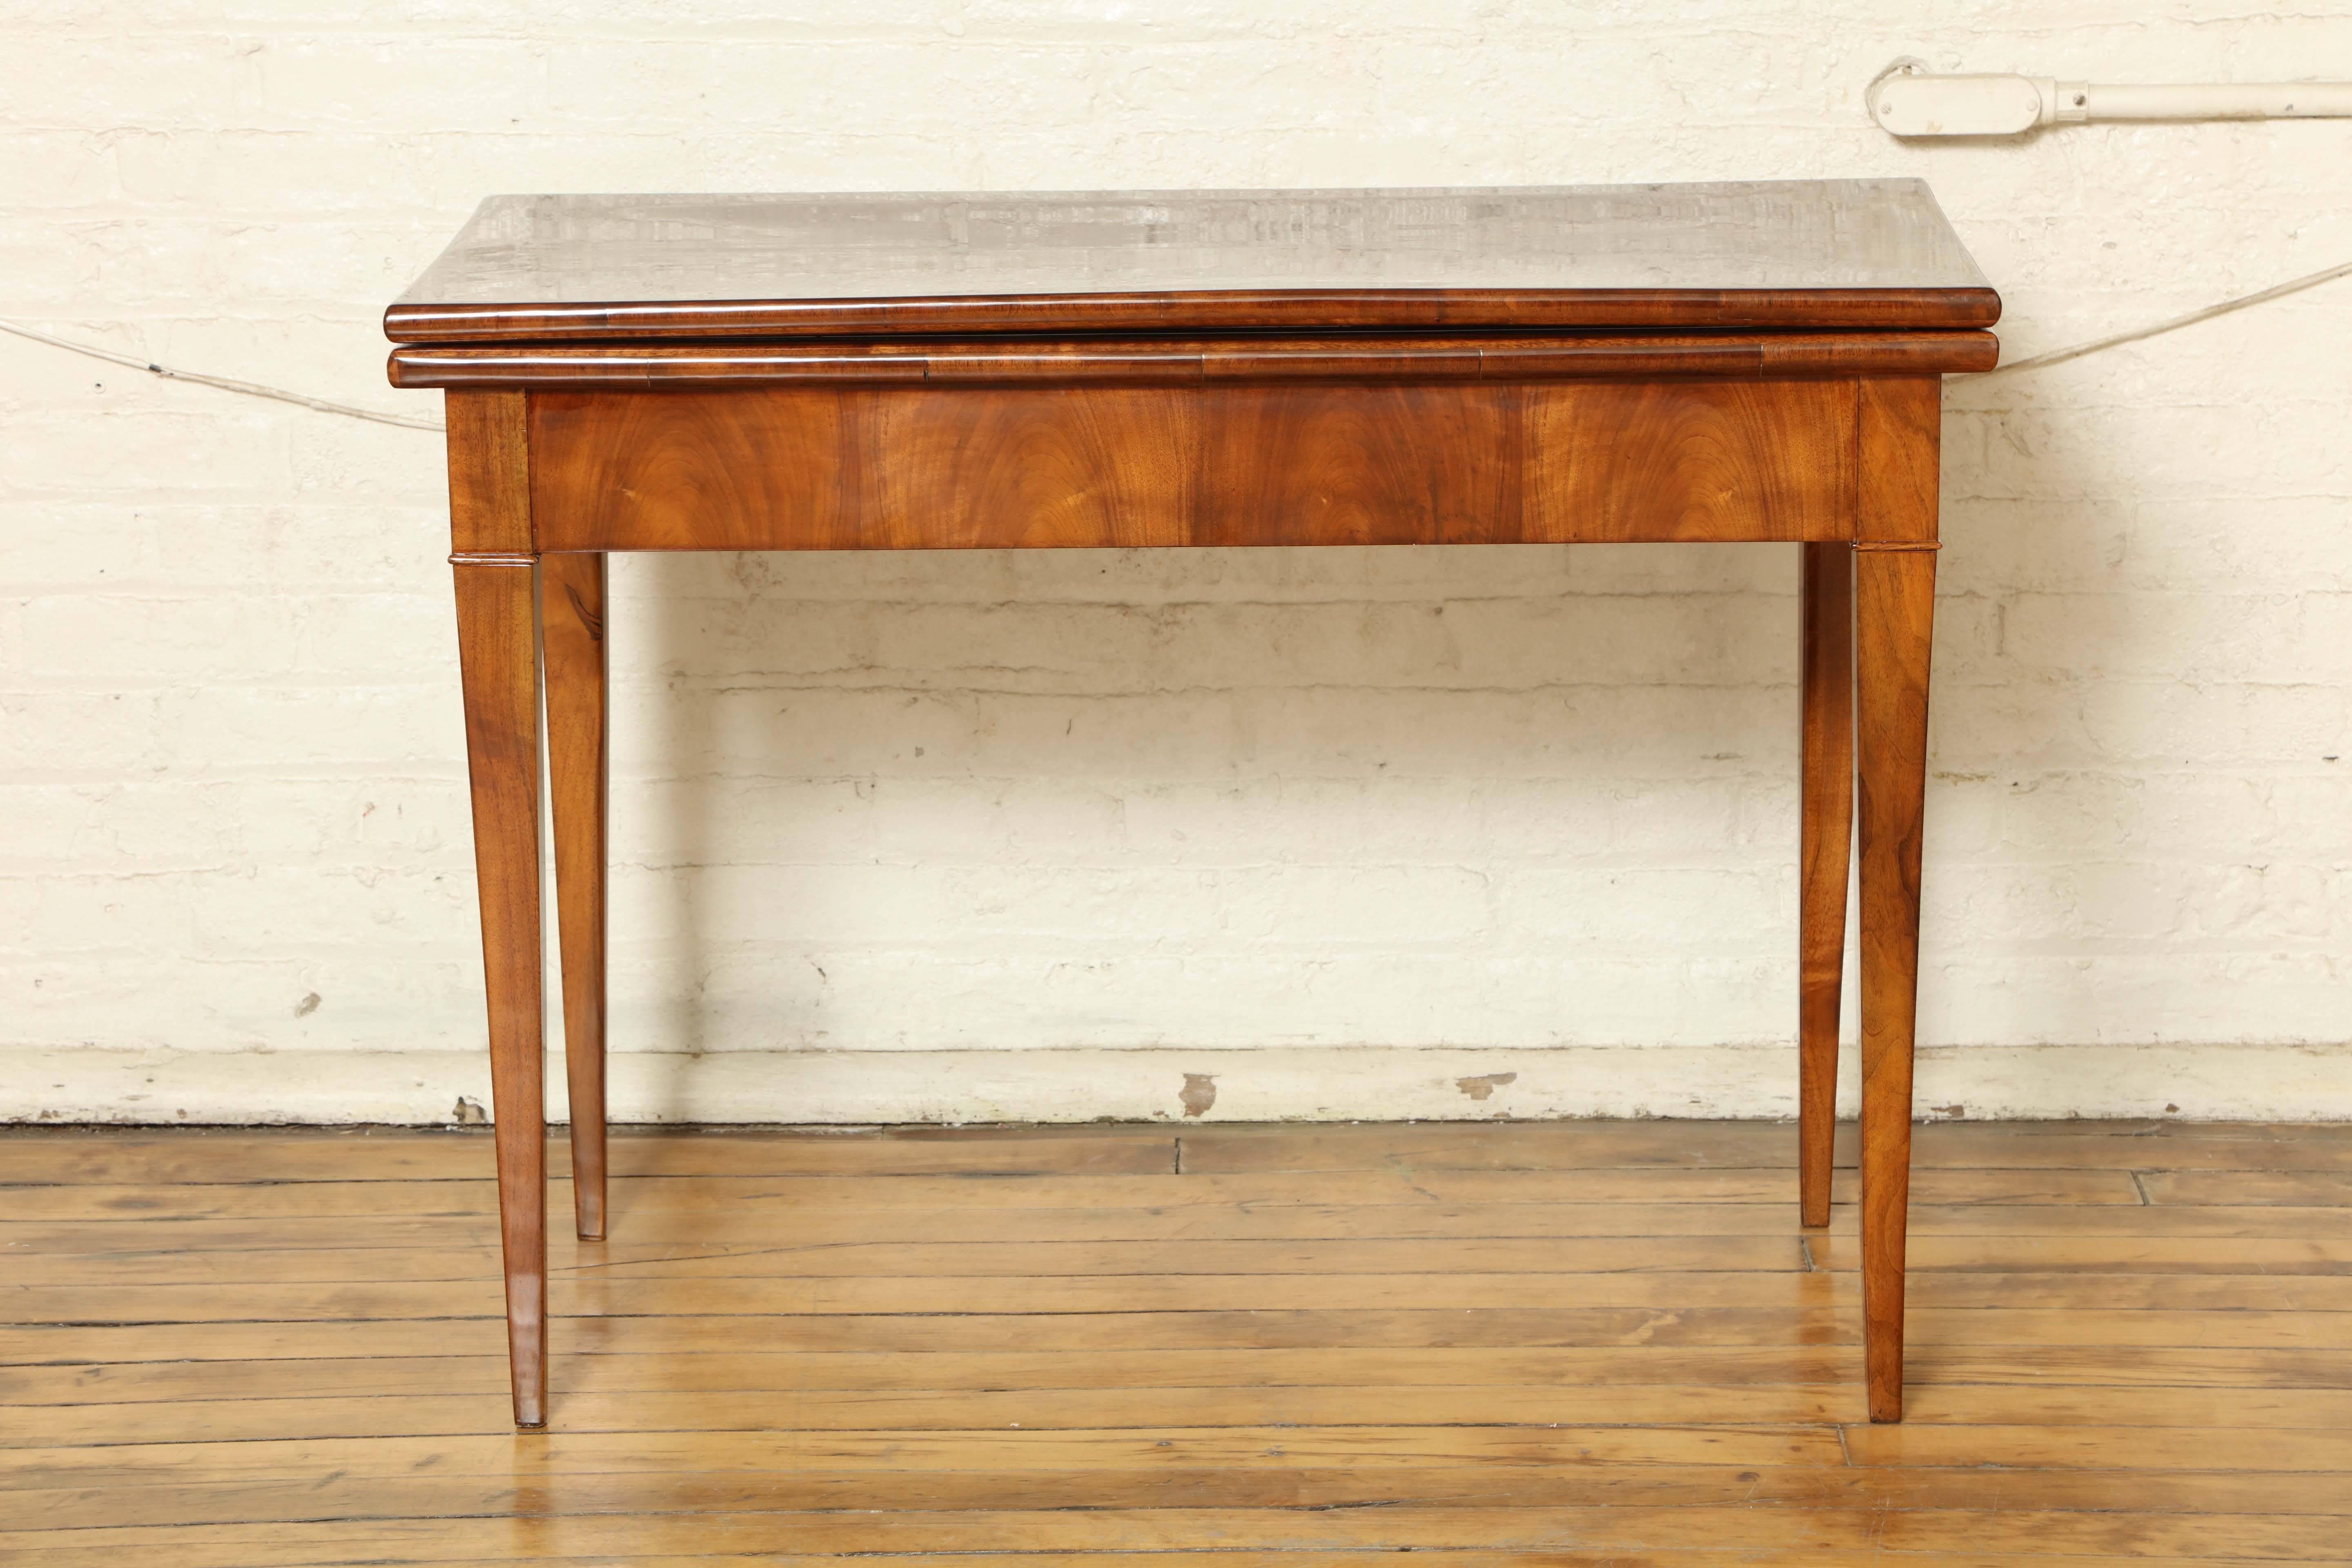 Art Deco console table opens up to a full size games/card table with leather top.
When closed as a console table it is approx. 34" x 17" x 30.5".
When open as a games table it is approx. 34" x 34" x 29.75".
Palisander